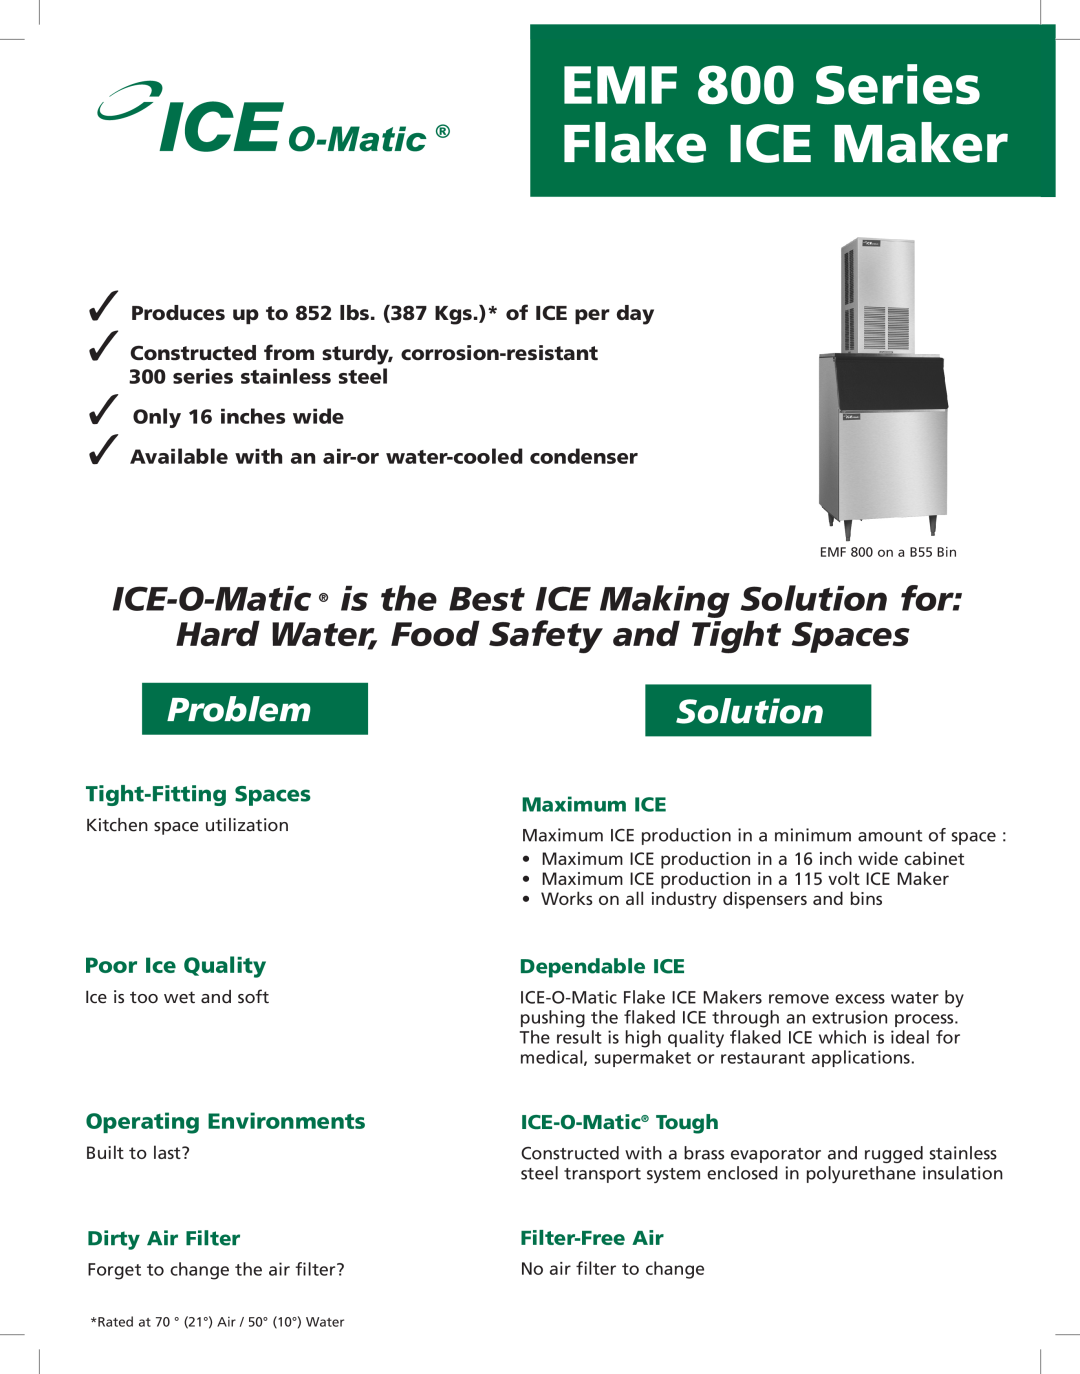 Ice-O-Matic manual EMF 800 Series, Flake ICE Maker, Problem, Solution, Tight-FittingSpaces, Poor Ice Quality 